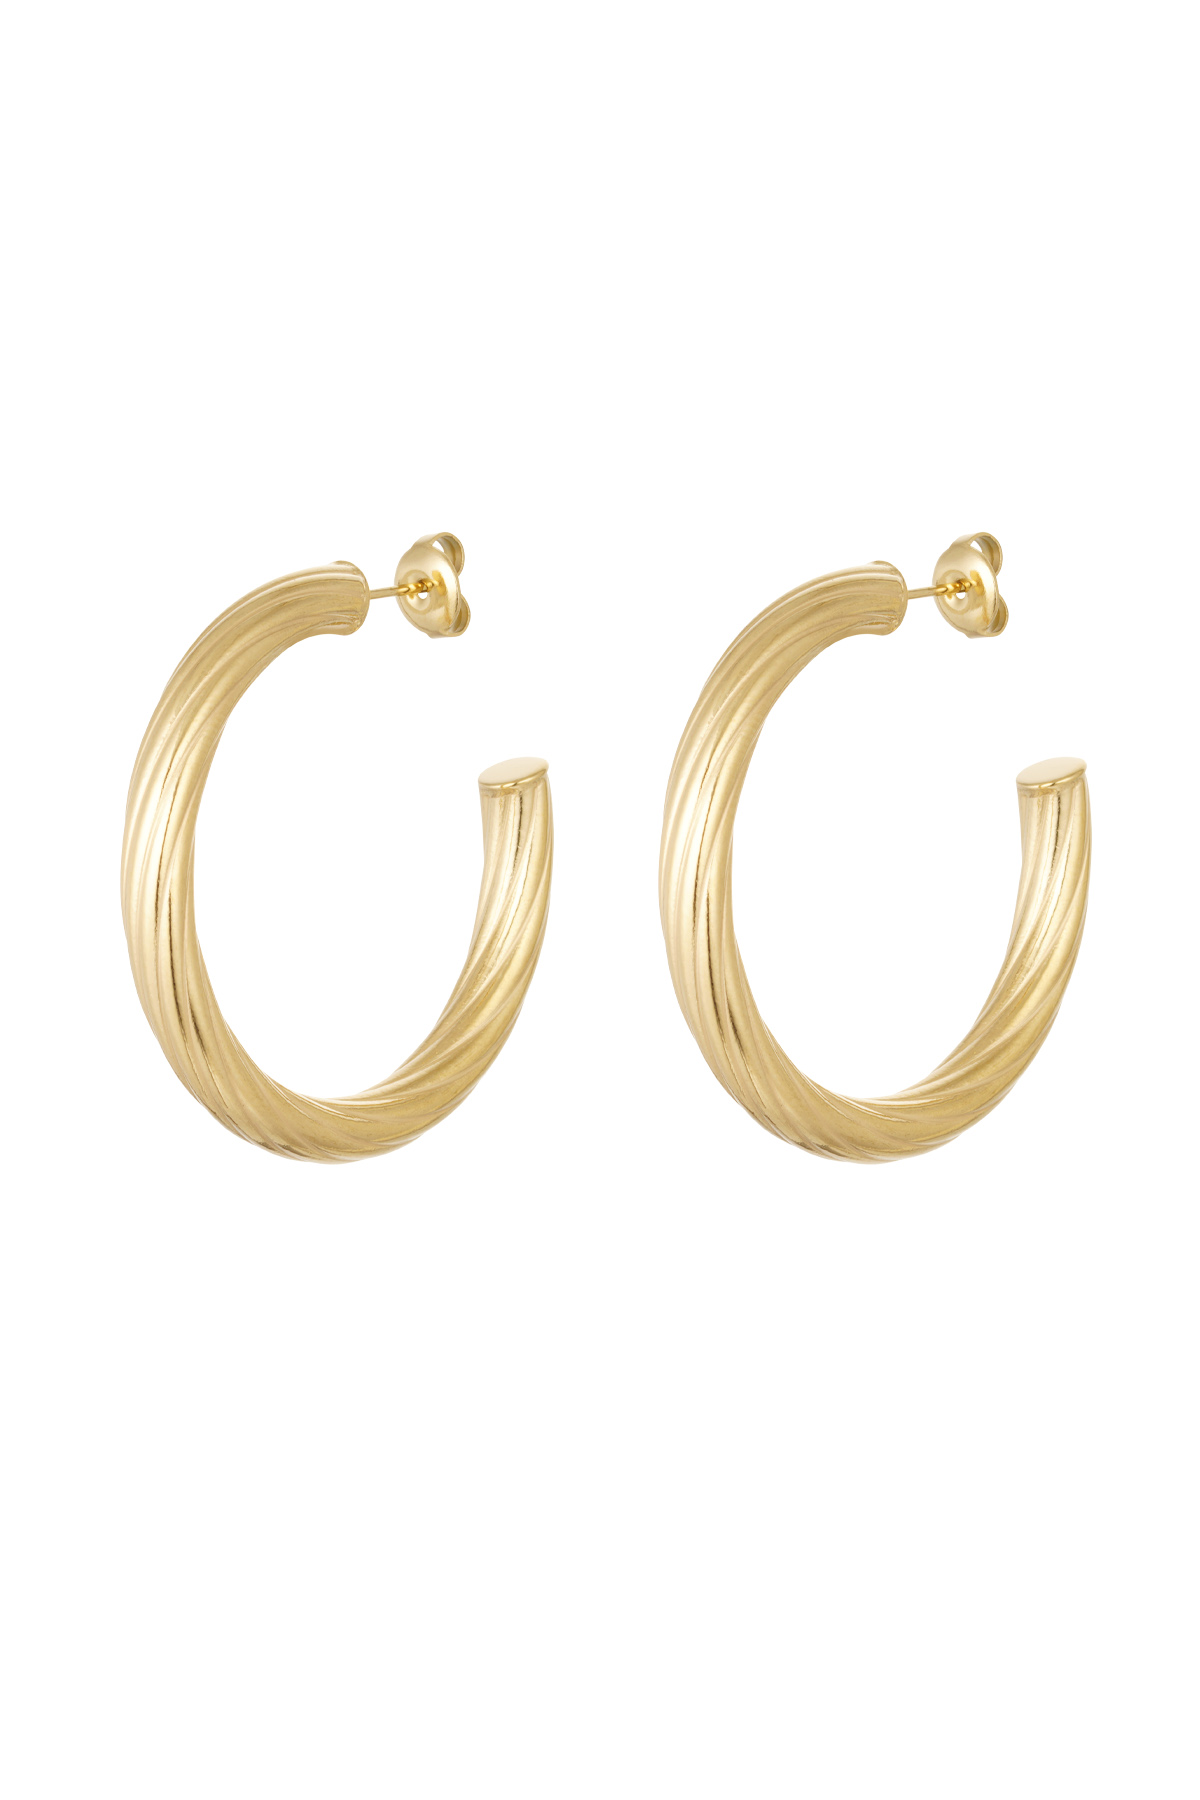 Earrings around stripes - gold h5 